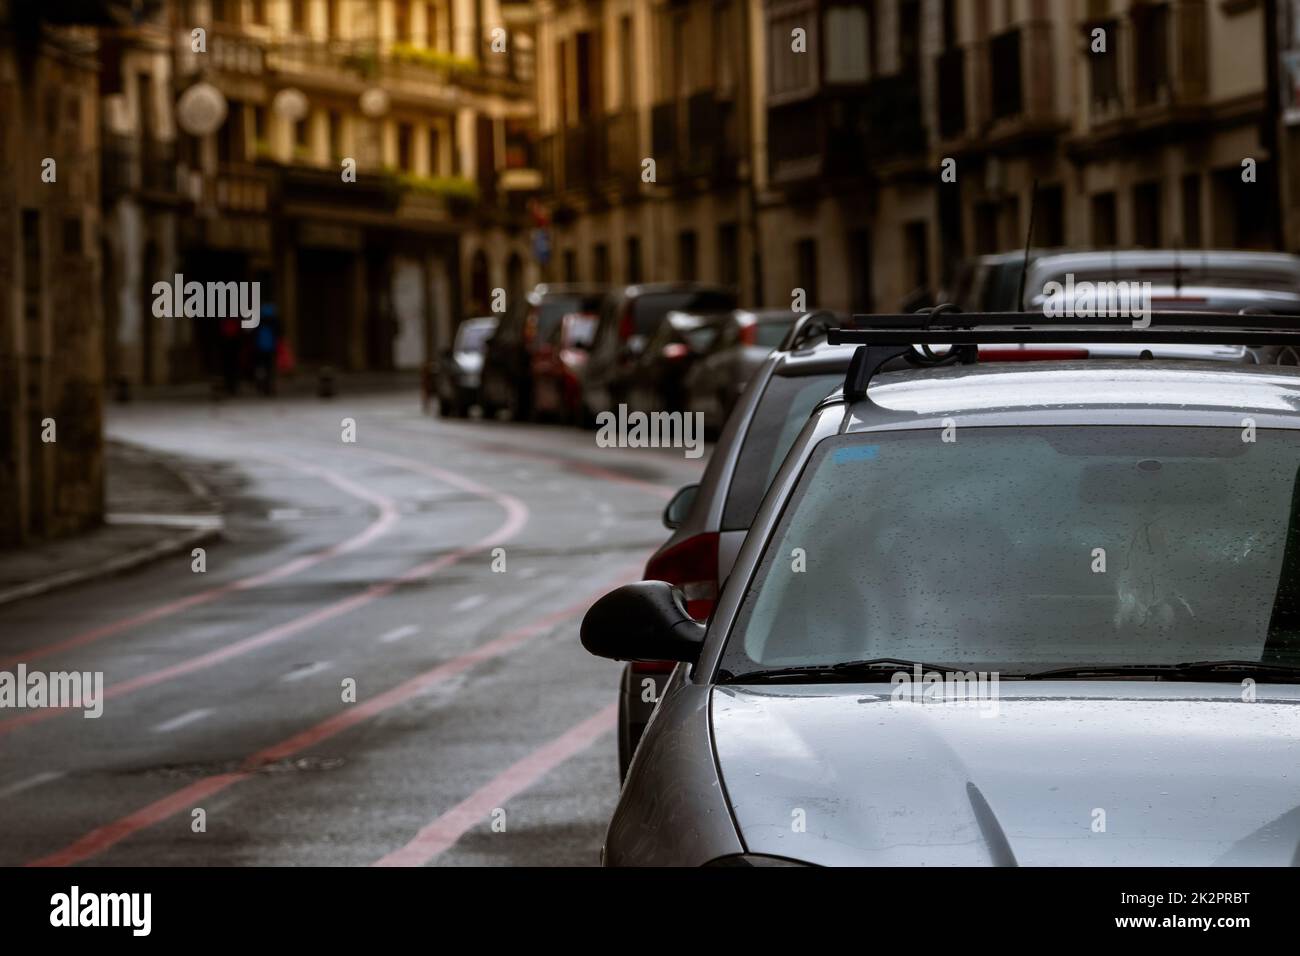 Row of cars parked along the street and old buildings in Europe city. Many cars parked on road in old town. City street in Europe. Front view of car parked outside residential building. City traffic. Stock Photo